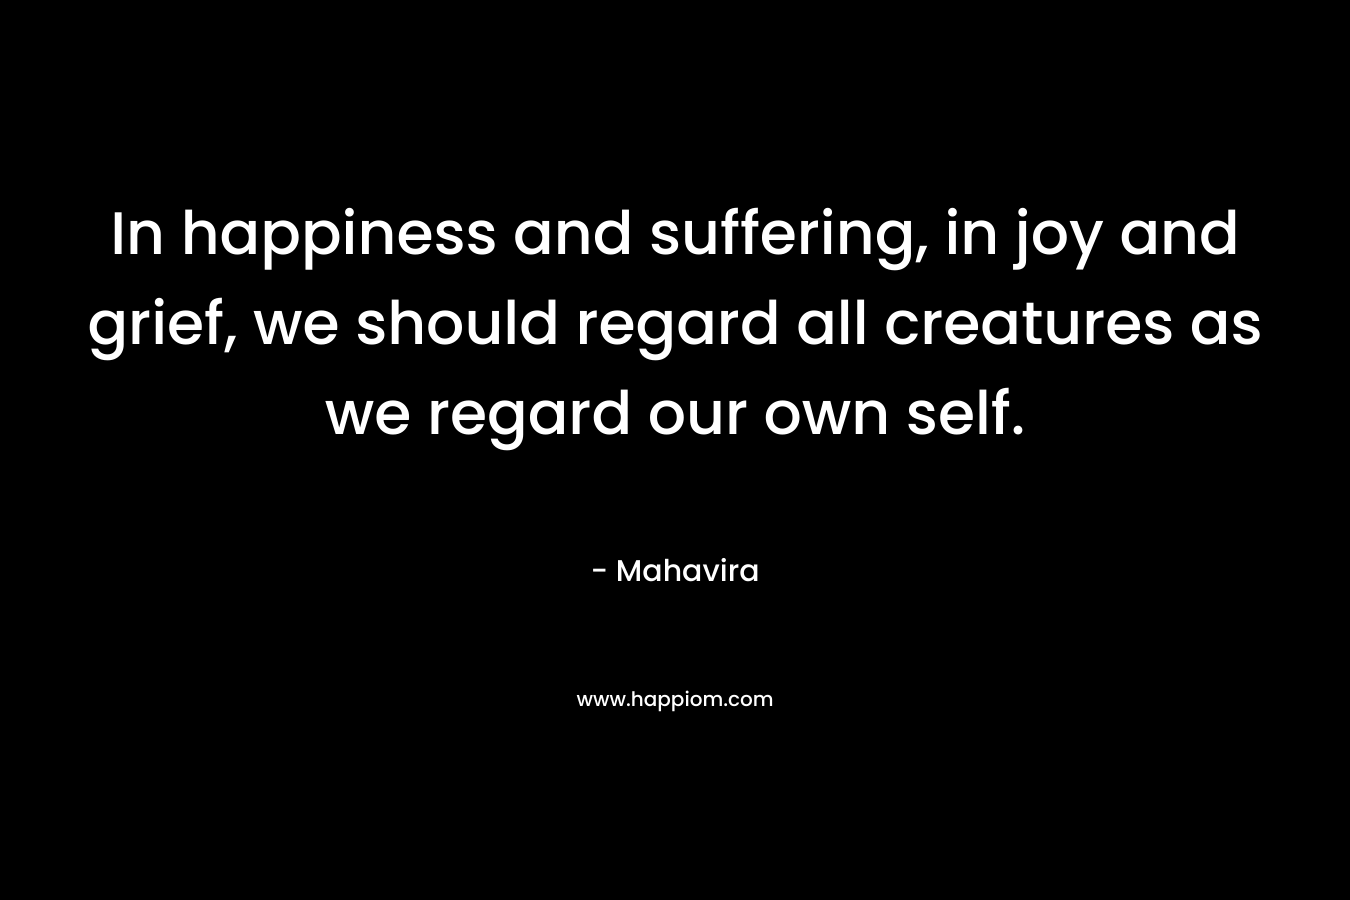 In happiness and suffering, in joy and grief, we should regard all creatures as we regard our own self.